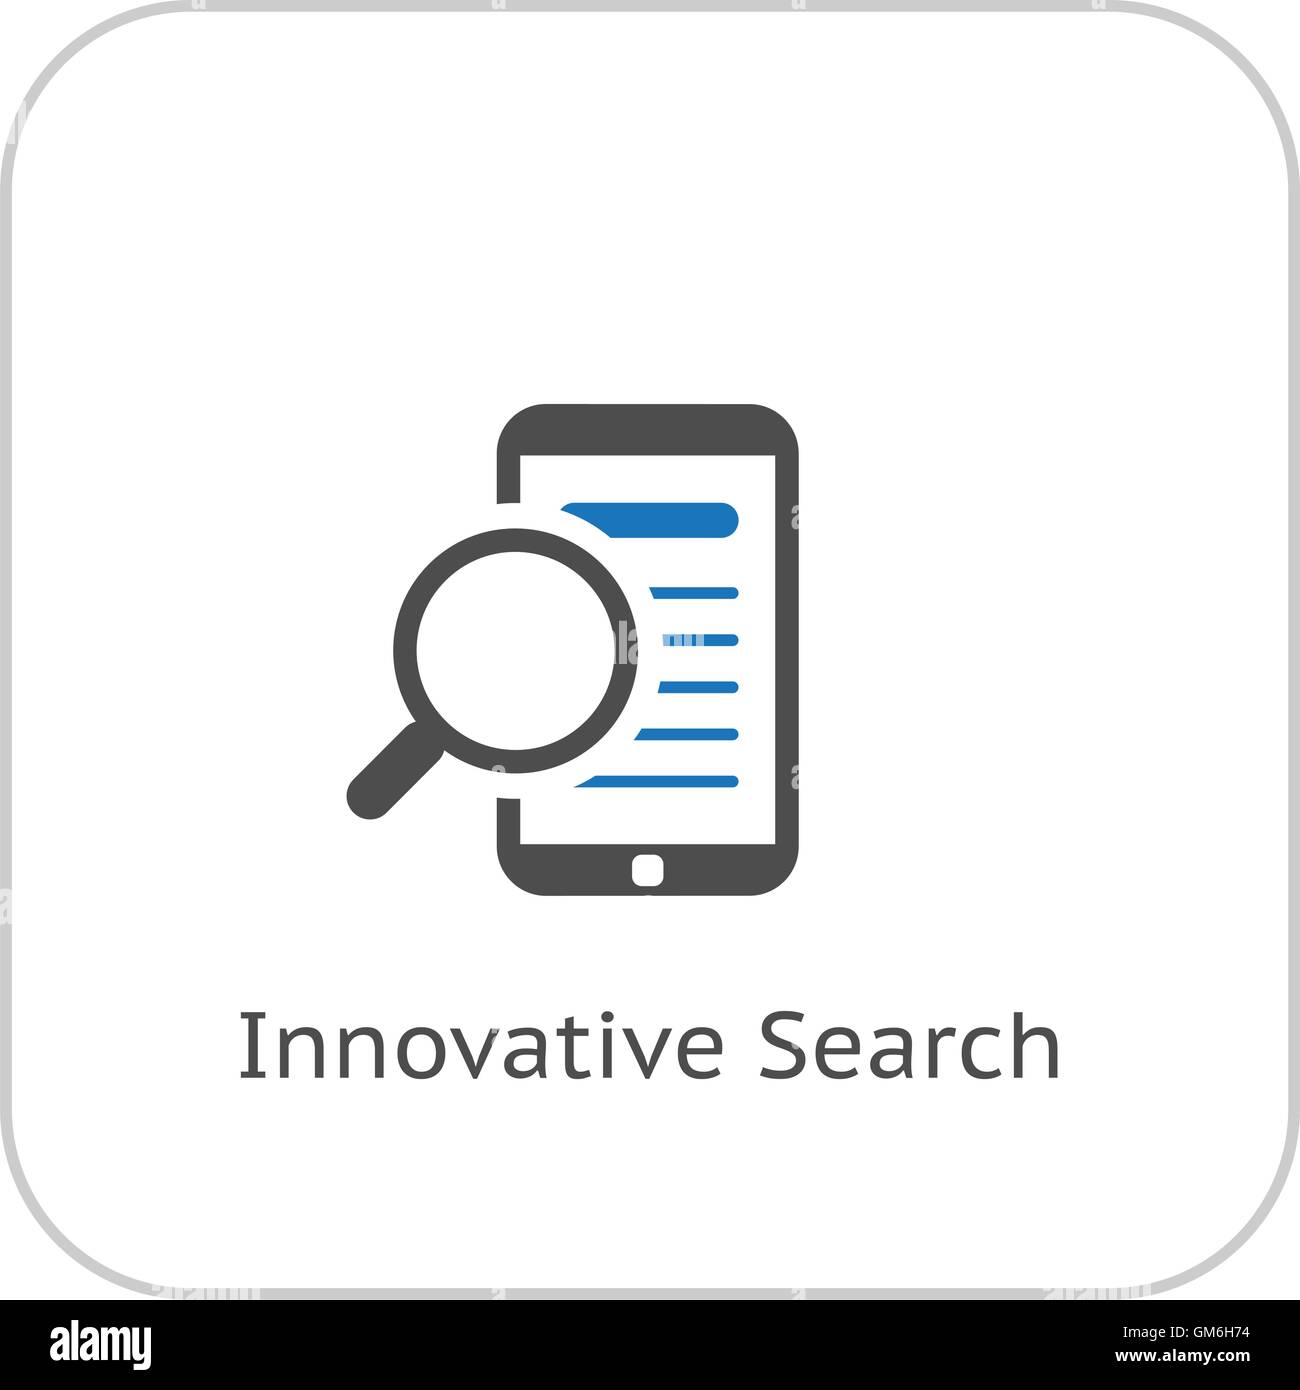 Innovative Search Icon. Business Concept. Flat Design. Stock Vector